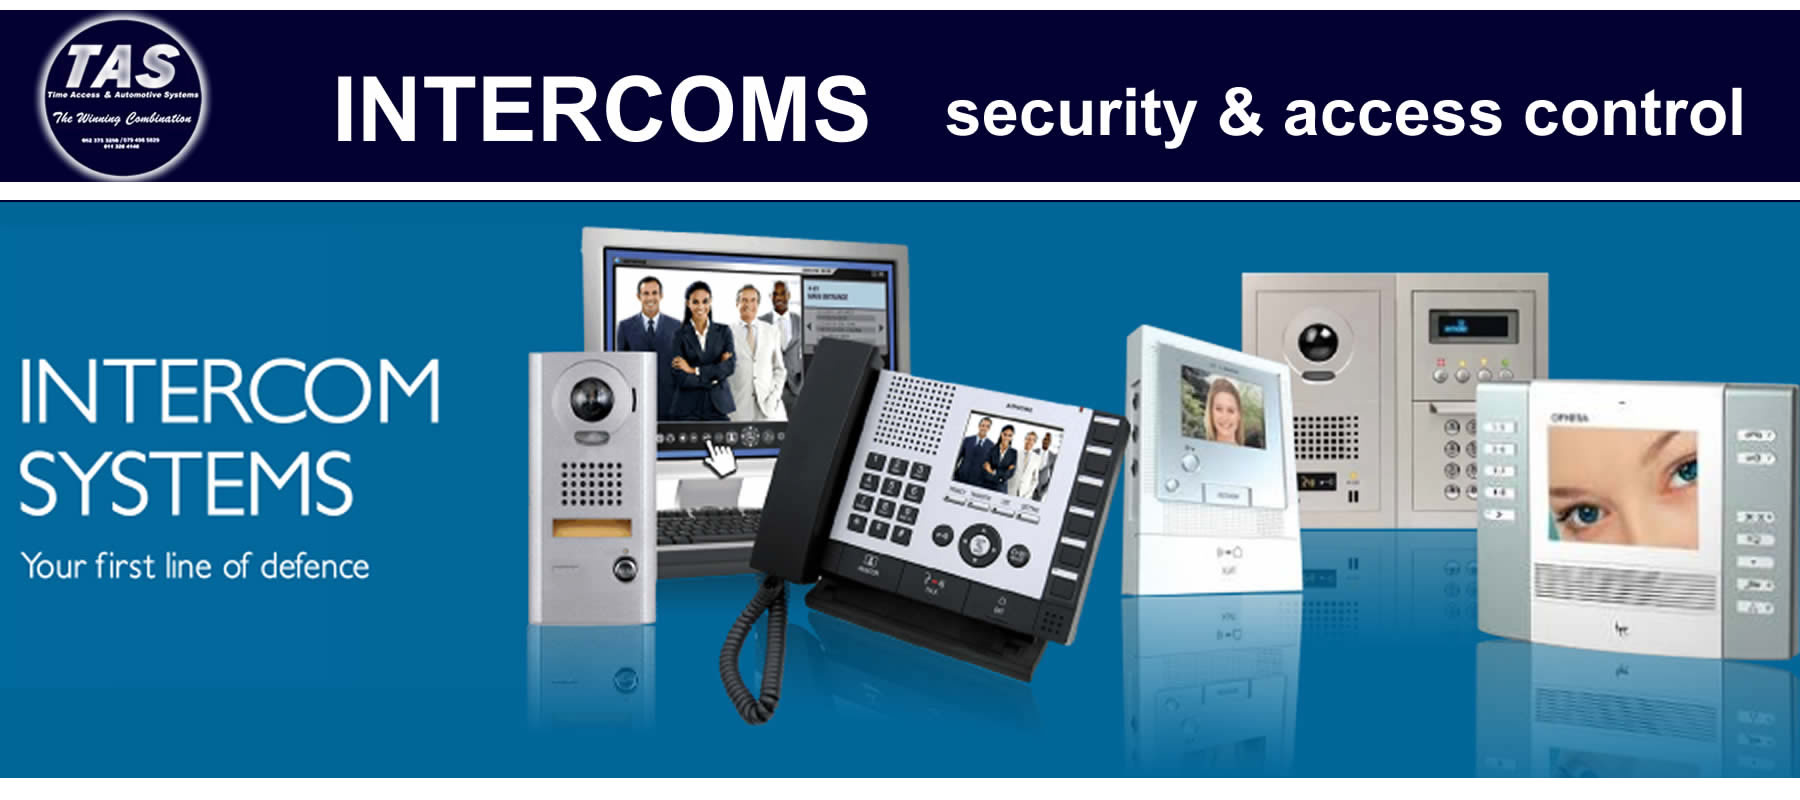 intercoms security control banner